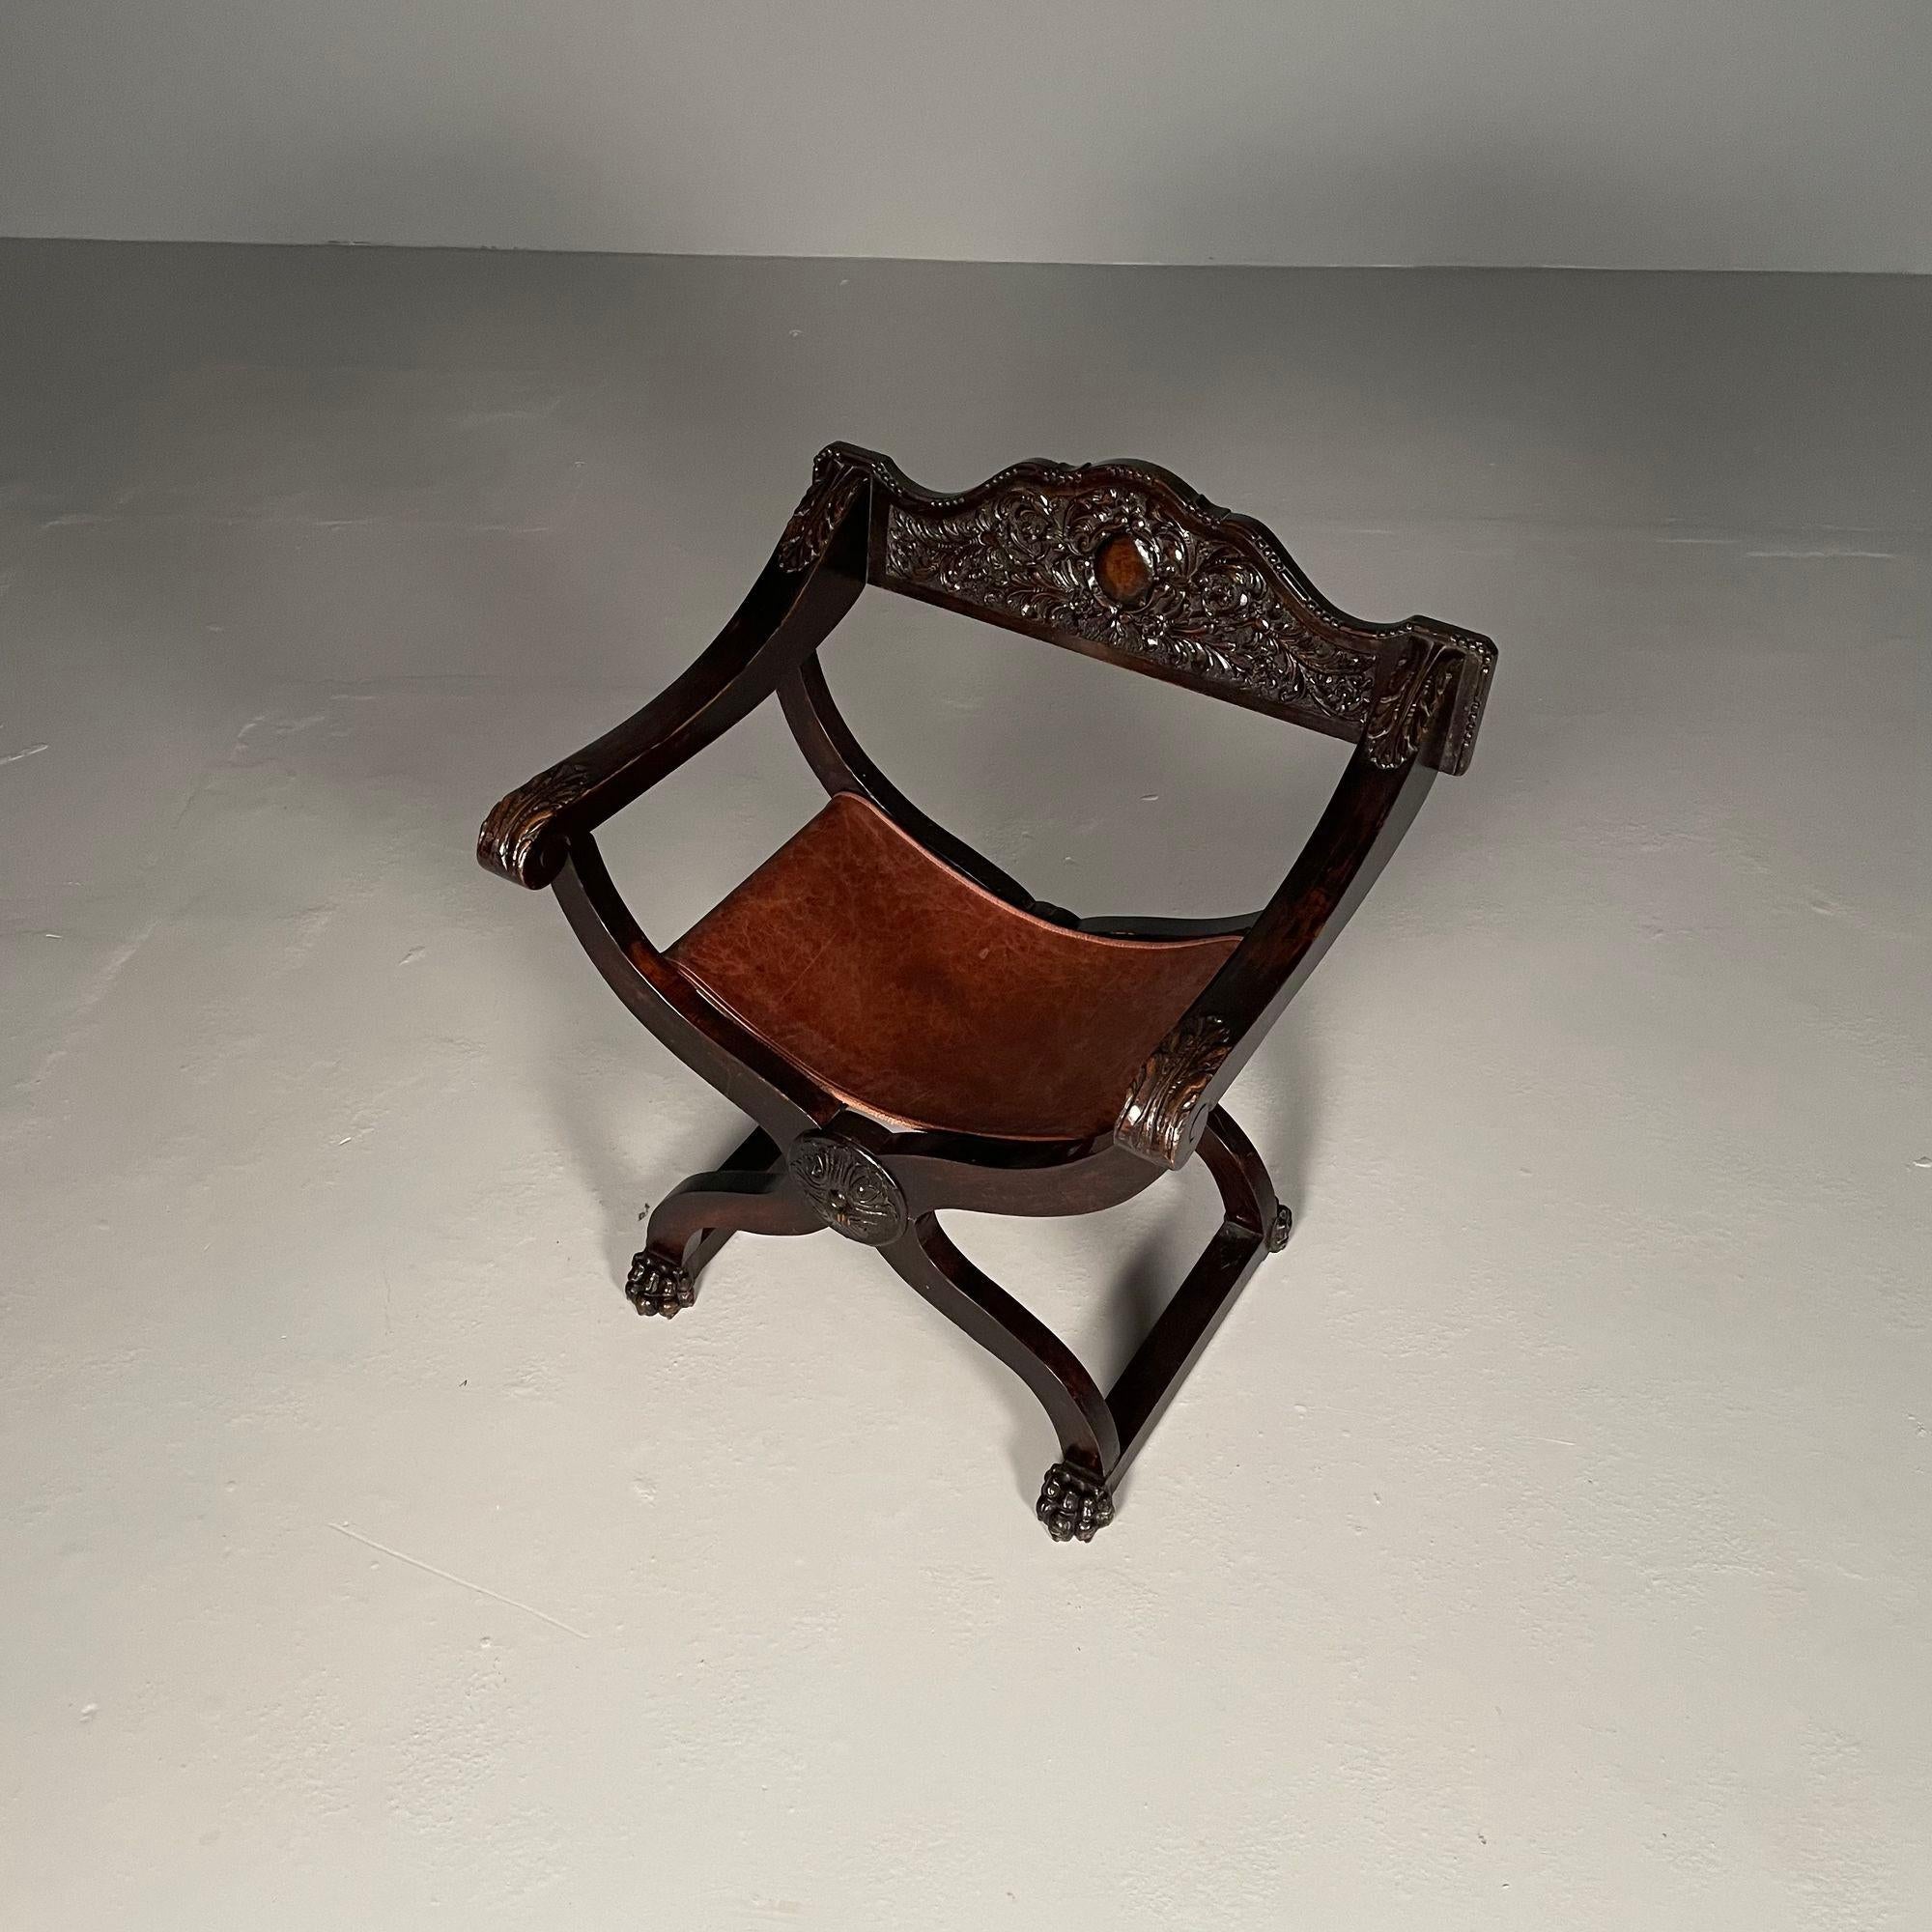 Italian Renaissance Arm / Office Chair, Carved, Leather Seat, 19th Century In Good Condition For Sale In Stamford, CT